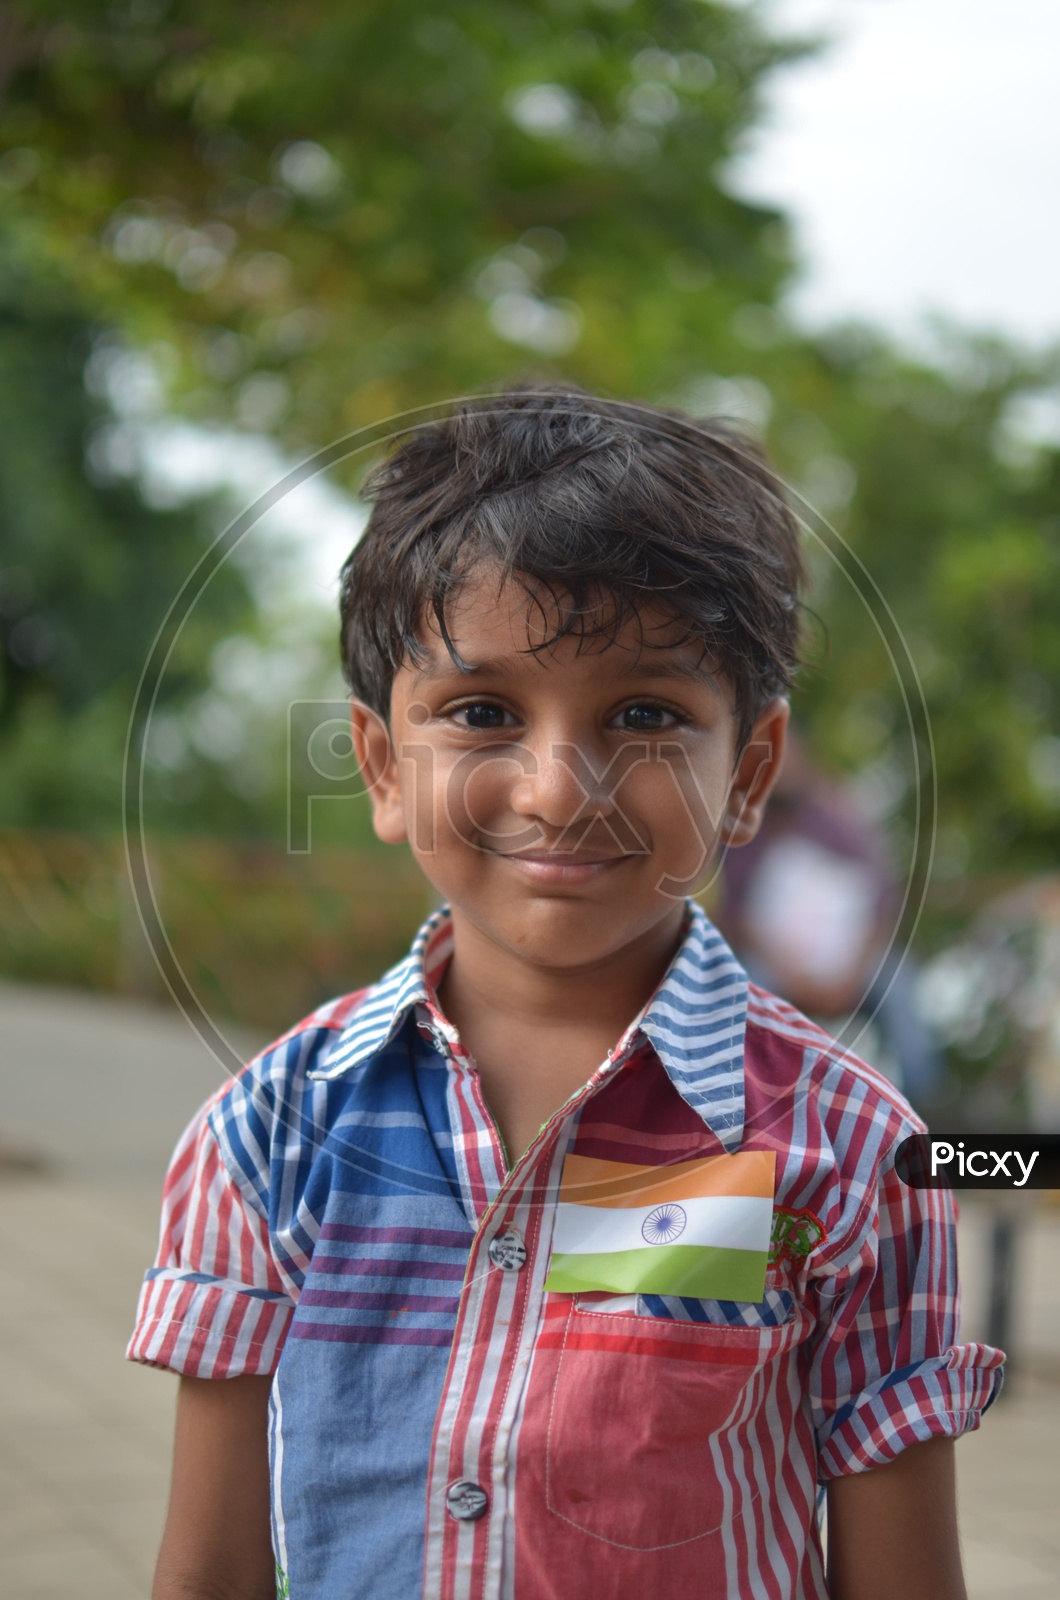 Boy child smiling face / Indian Children Smiling Faces / Childrens Wearing Indian Flag on Indipendence Day